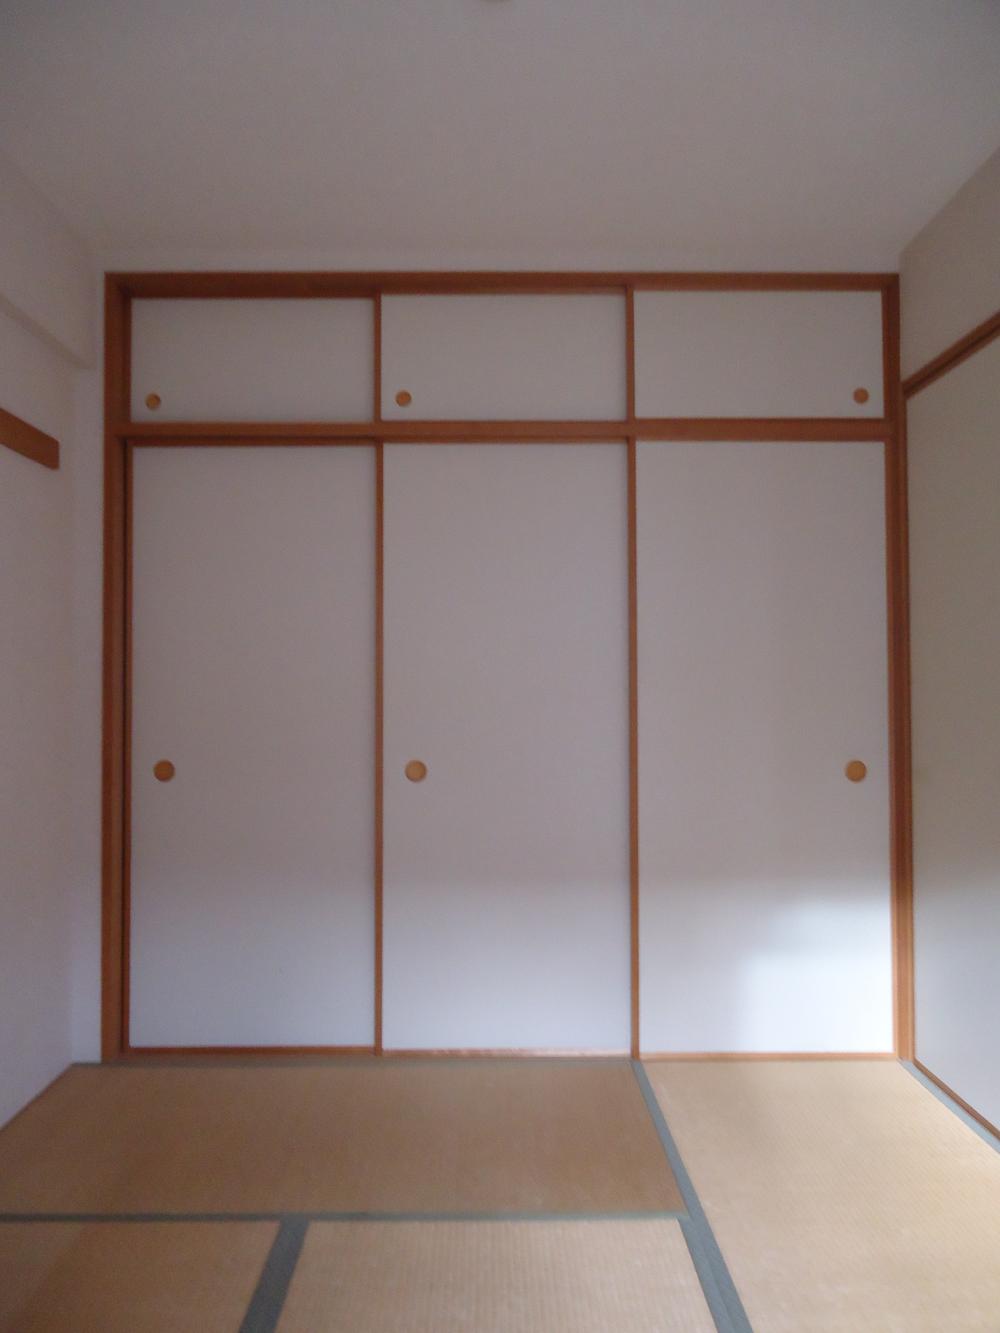 Non-living room. Closet of the Japanese-style room has storage capacity in size between 1.5.